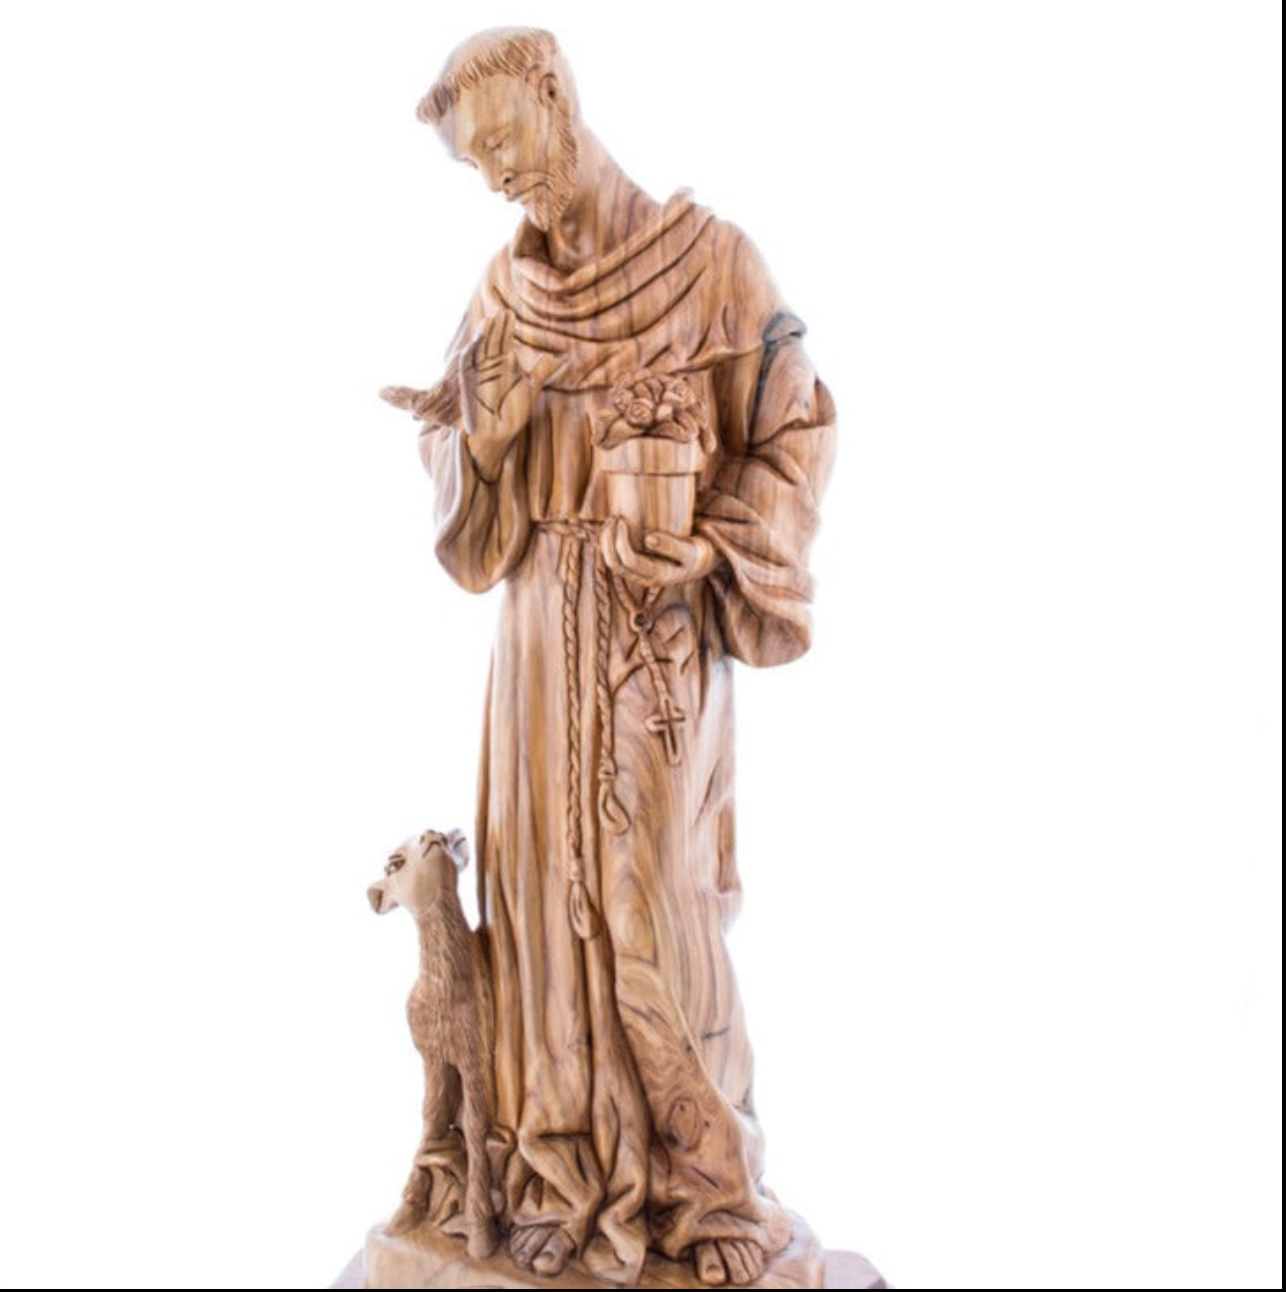 Saint Francis of Assisi with Bird on Hand, Standing next to a Young Deer, Tall Church Sculpture Biblical Inspired Hand Made Figurine, Cross Tied Around Waist 